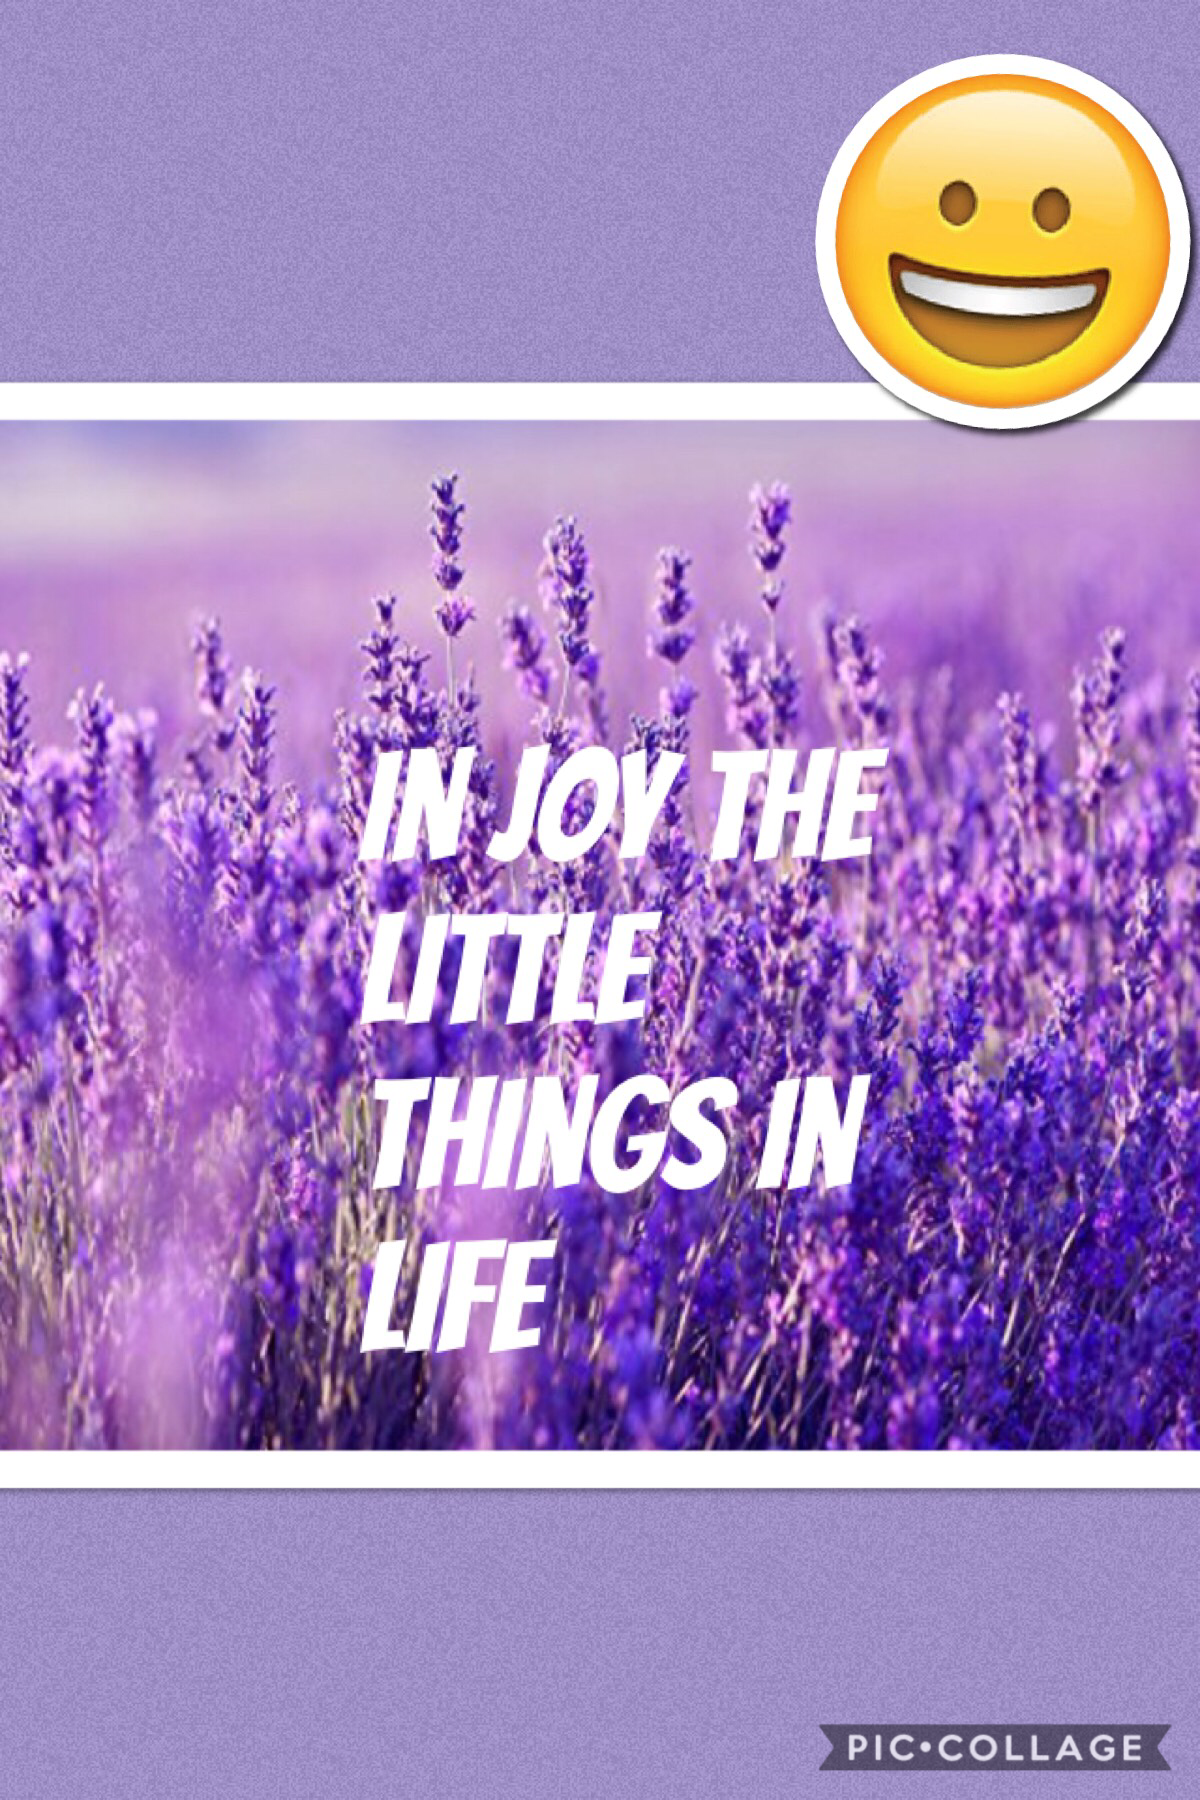 Injoy the little things it life